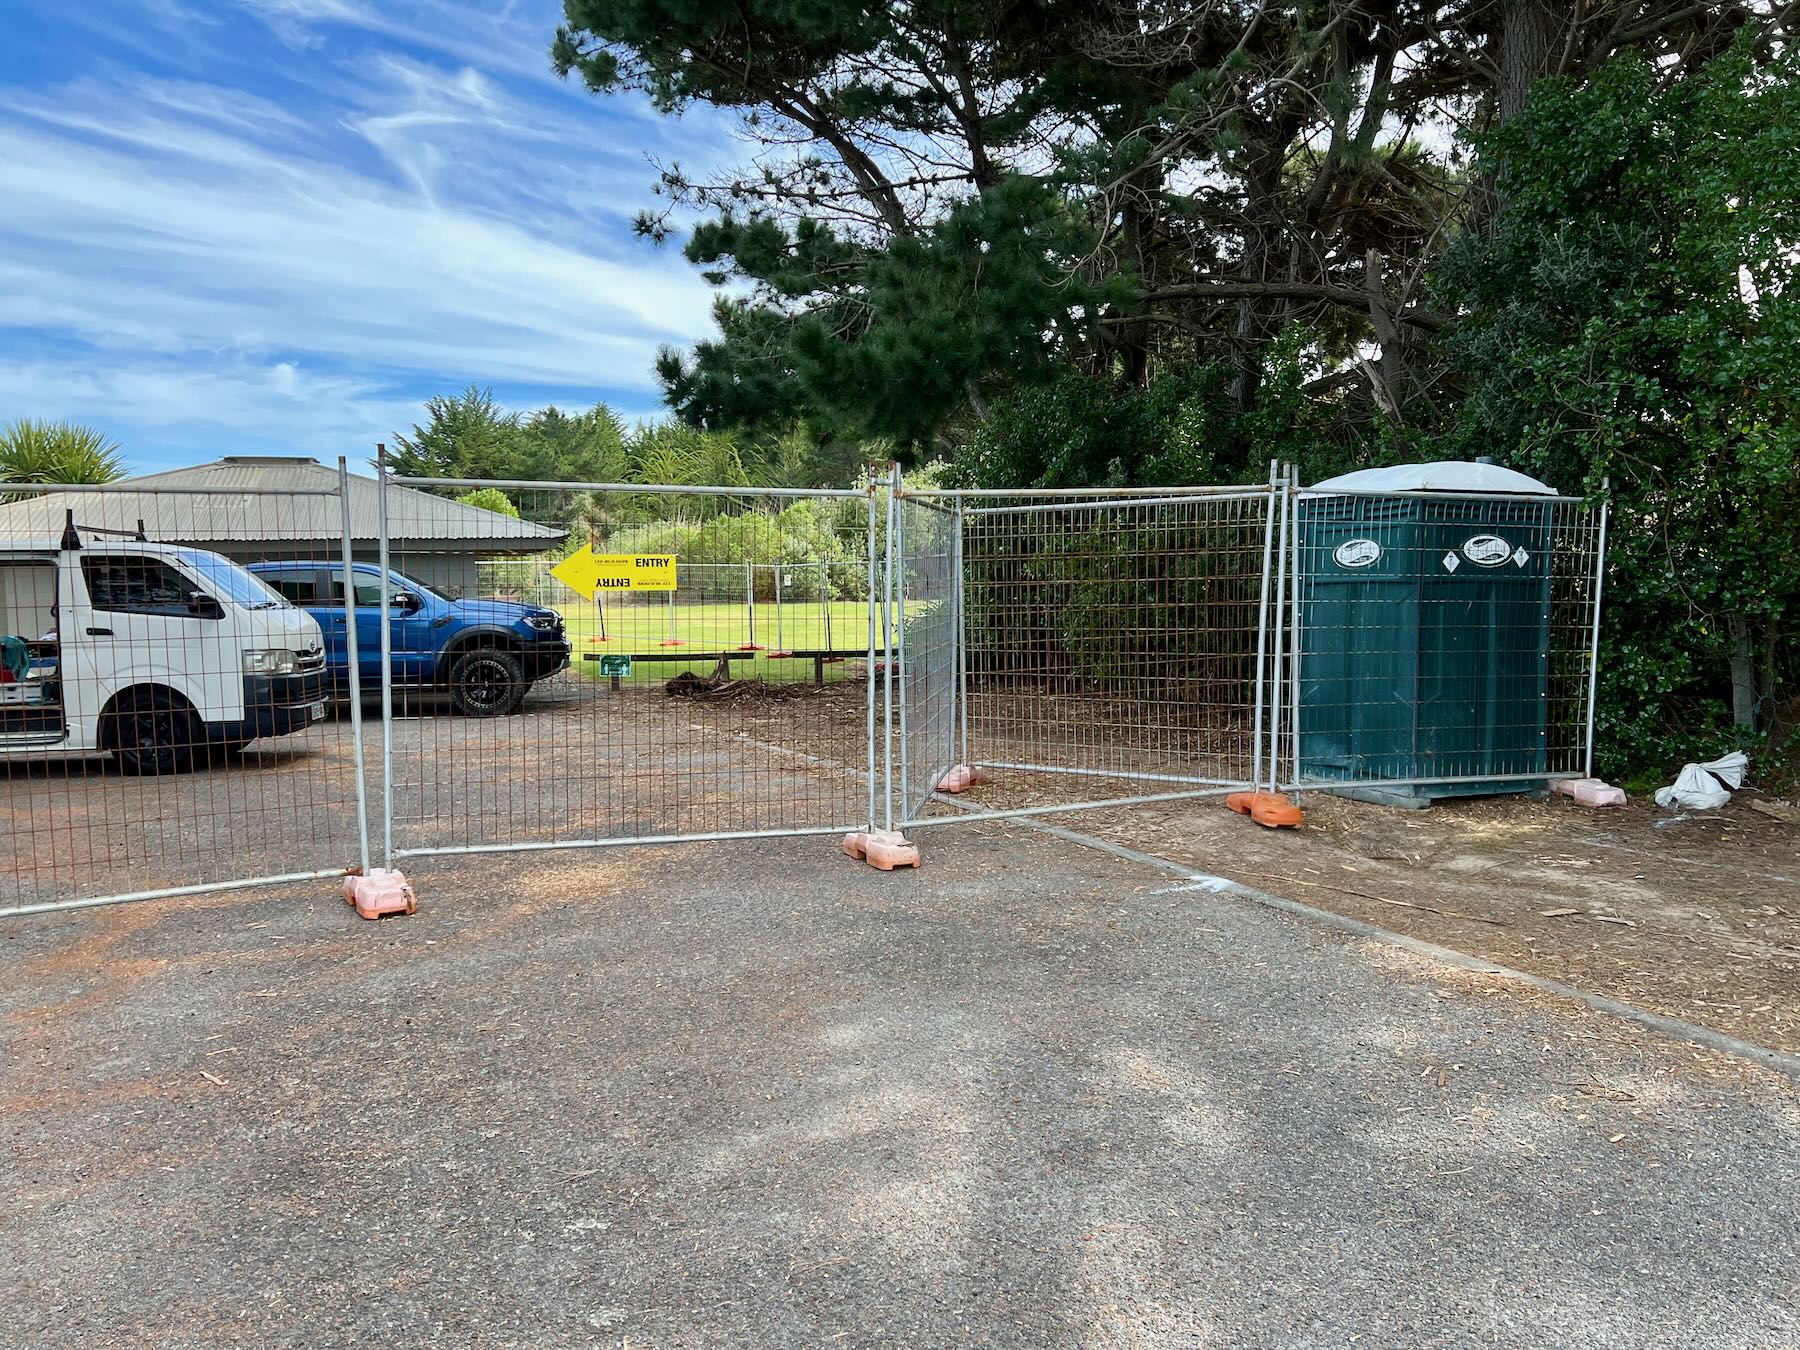 More fence and the portaloo for the builders. 